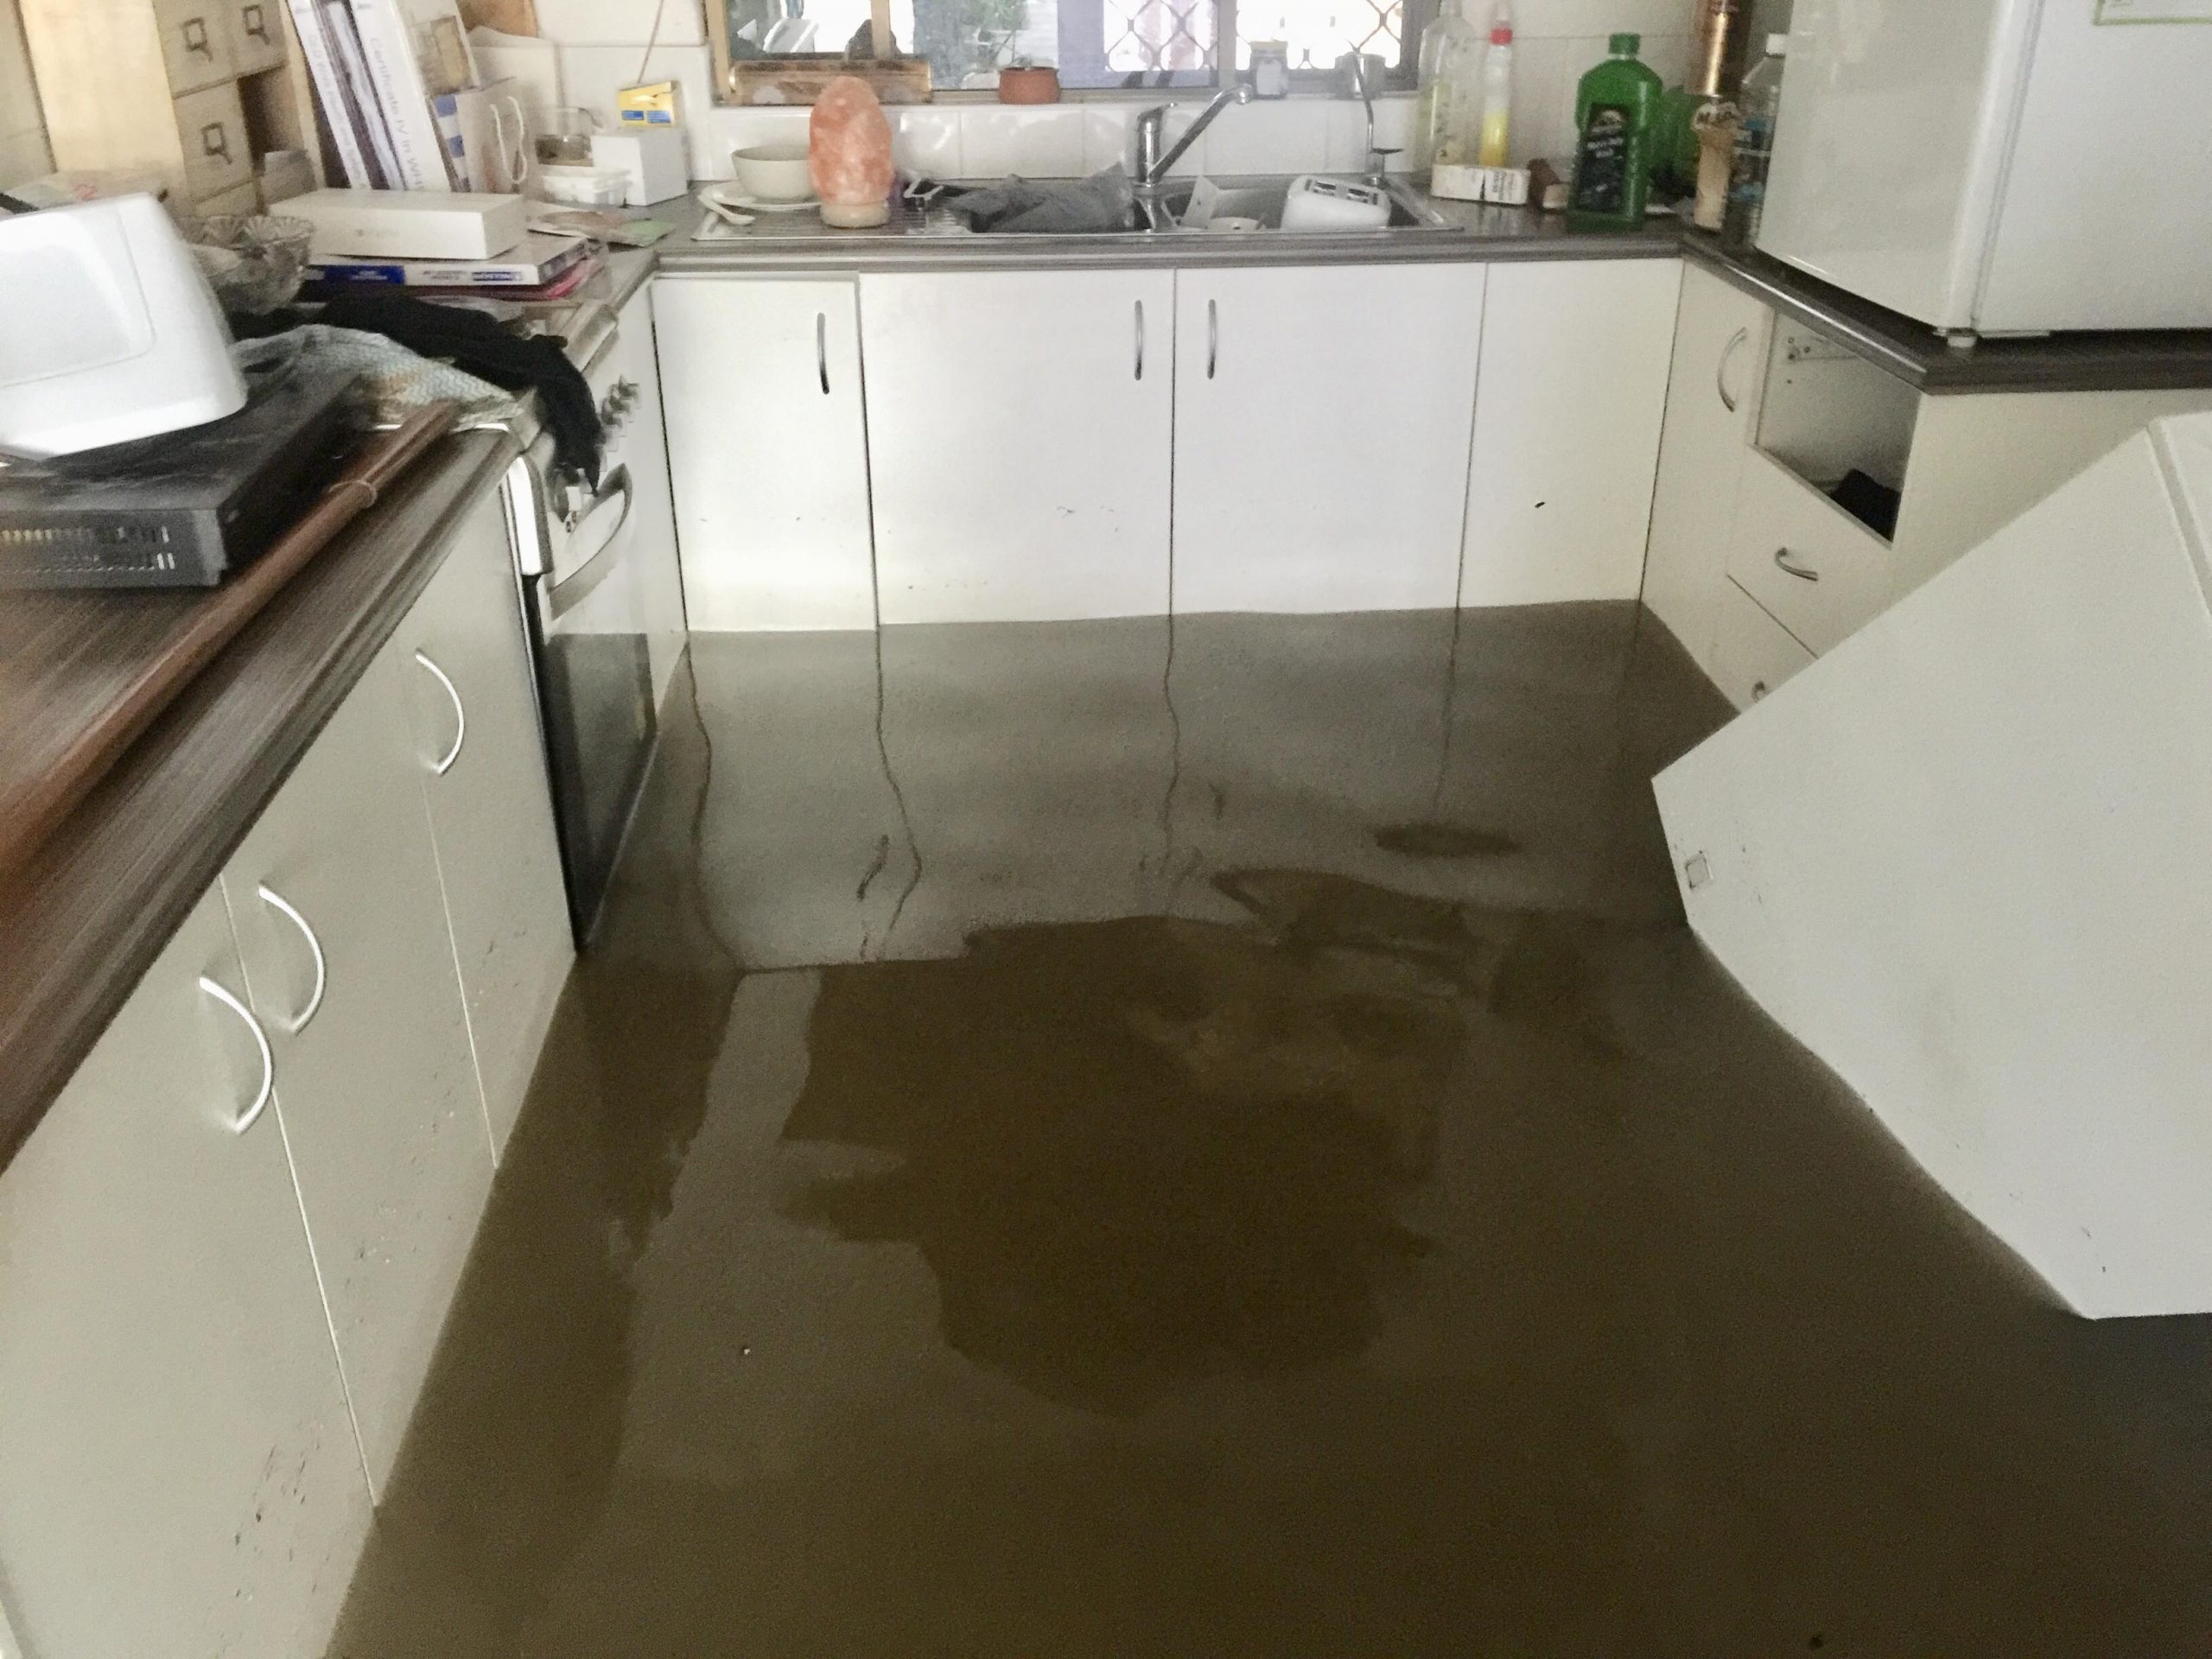 The ongoing economic impact of the 2019 Townsville Floods is substantial